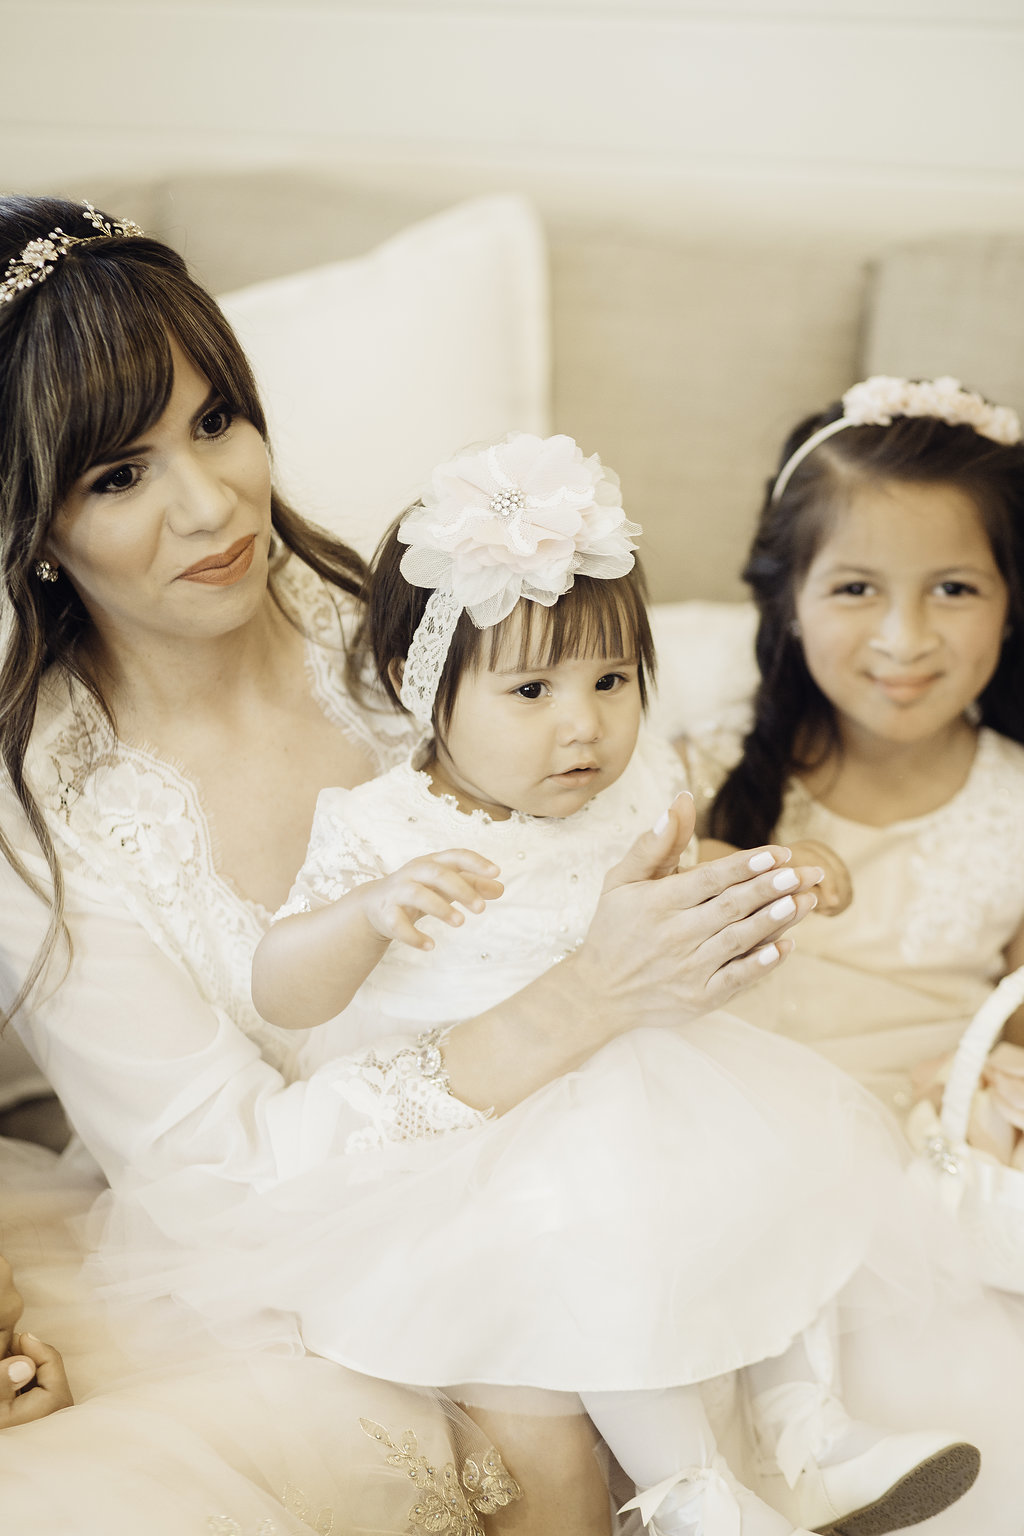 Wedding Photograph Of Woman Clapping While Carrying a Toddler Los Angeles